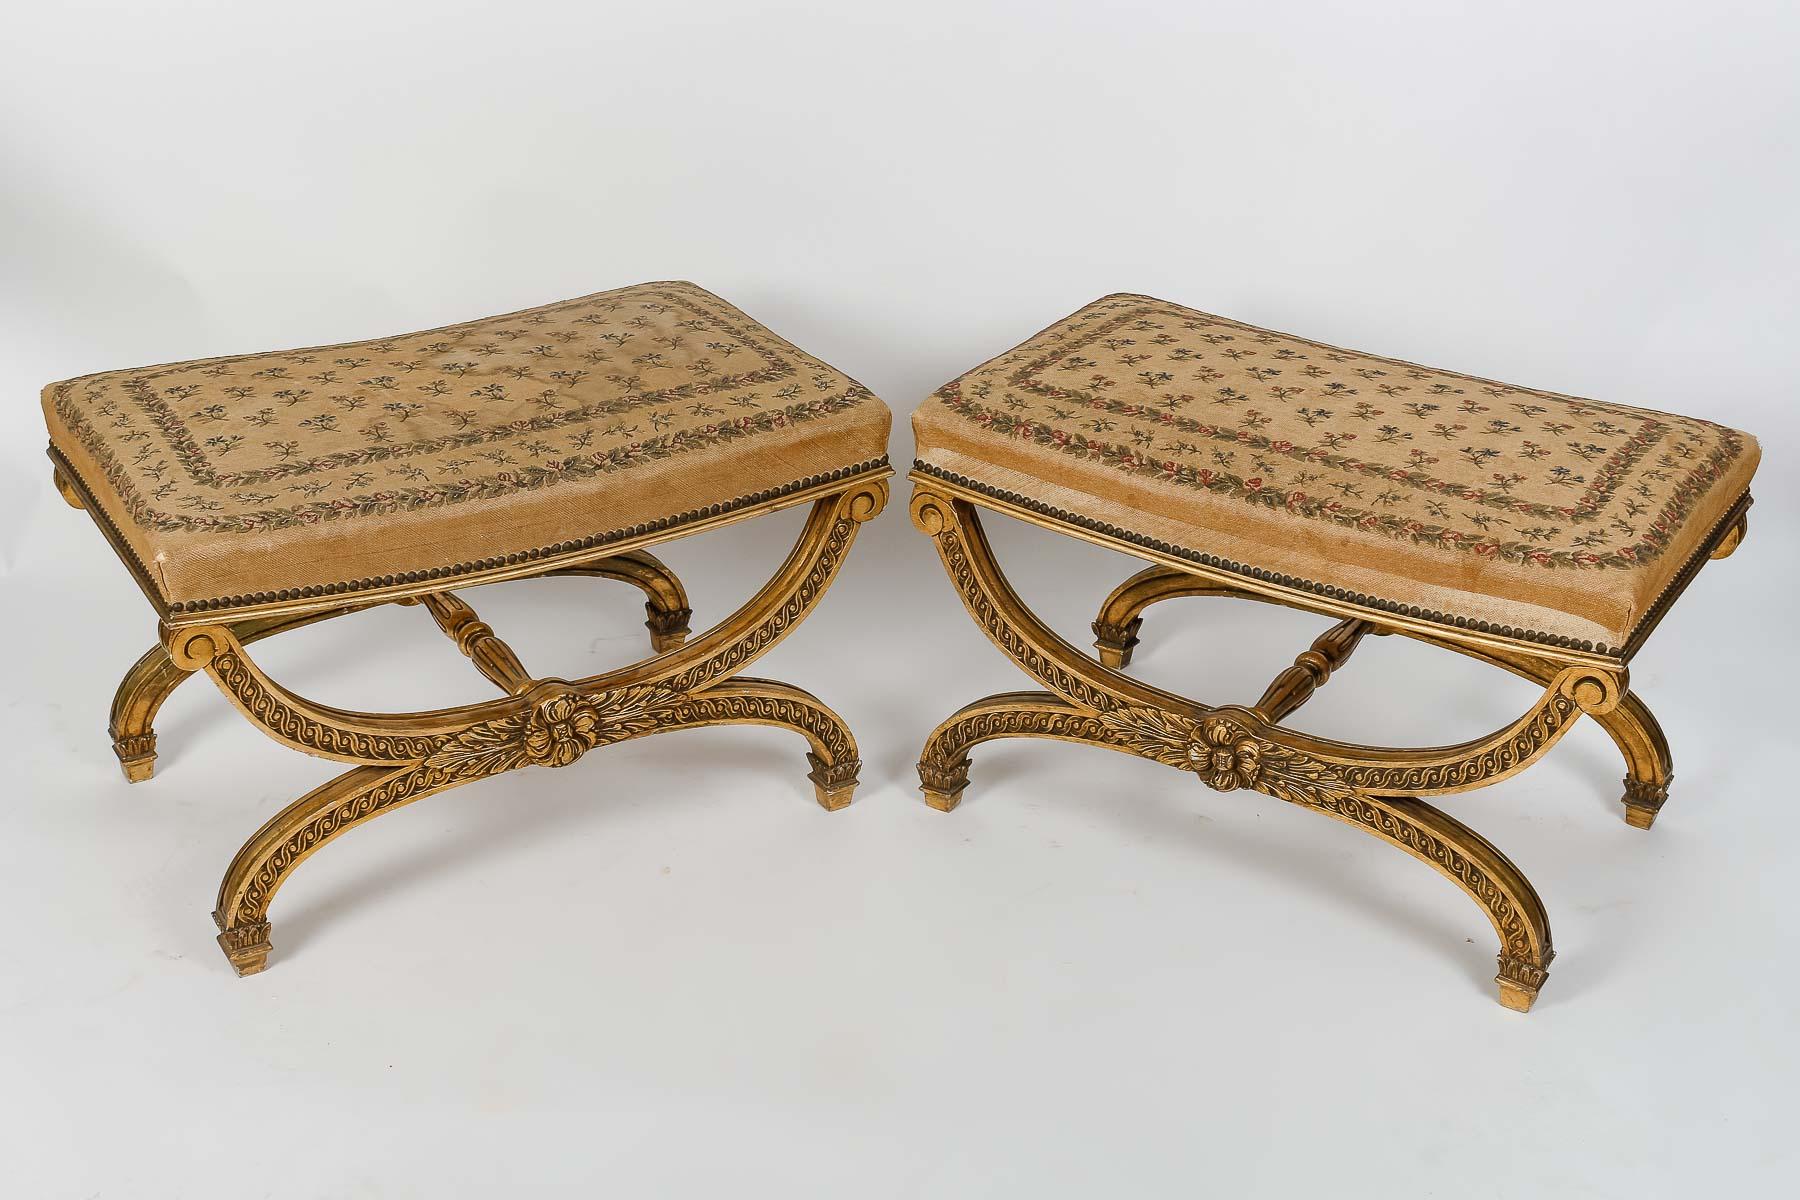 A French 19th Century Pair of Large Rectangular Curule Stools 
Gilt and carved wood, decorated with interlace frieze, acanthus leaves and rosaces
The 4 feet linked by a gadrooned stretcher.
Louis XVI Style 
Napoléon III Period 
In the manner of